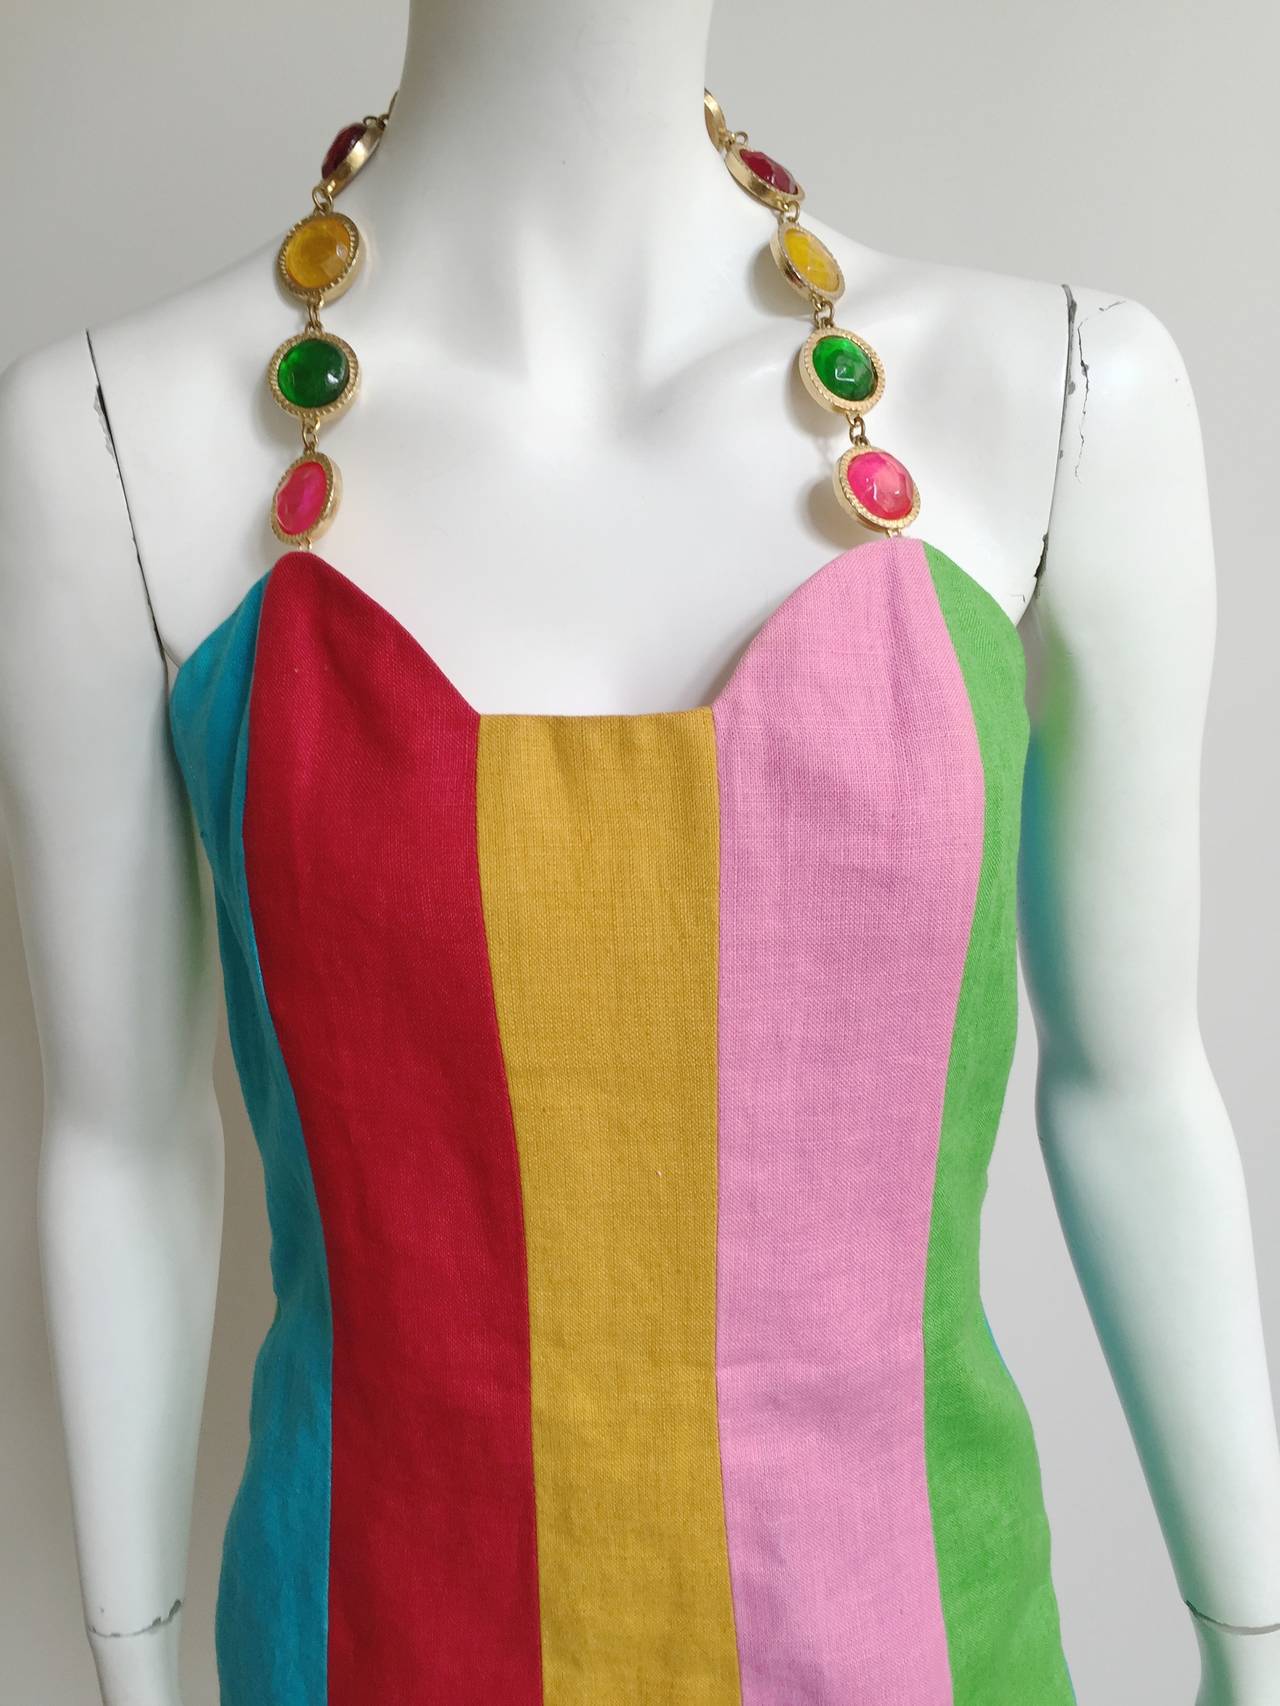 Gemma Kahng 1990s striped linen dress with colorful jewel adjustable neckline size 8 but please see and use measurements. Boned corset for complete structure & support. 
Measurements are:
37